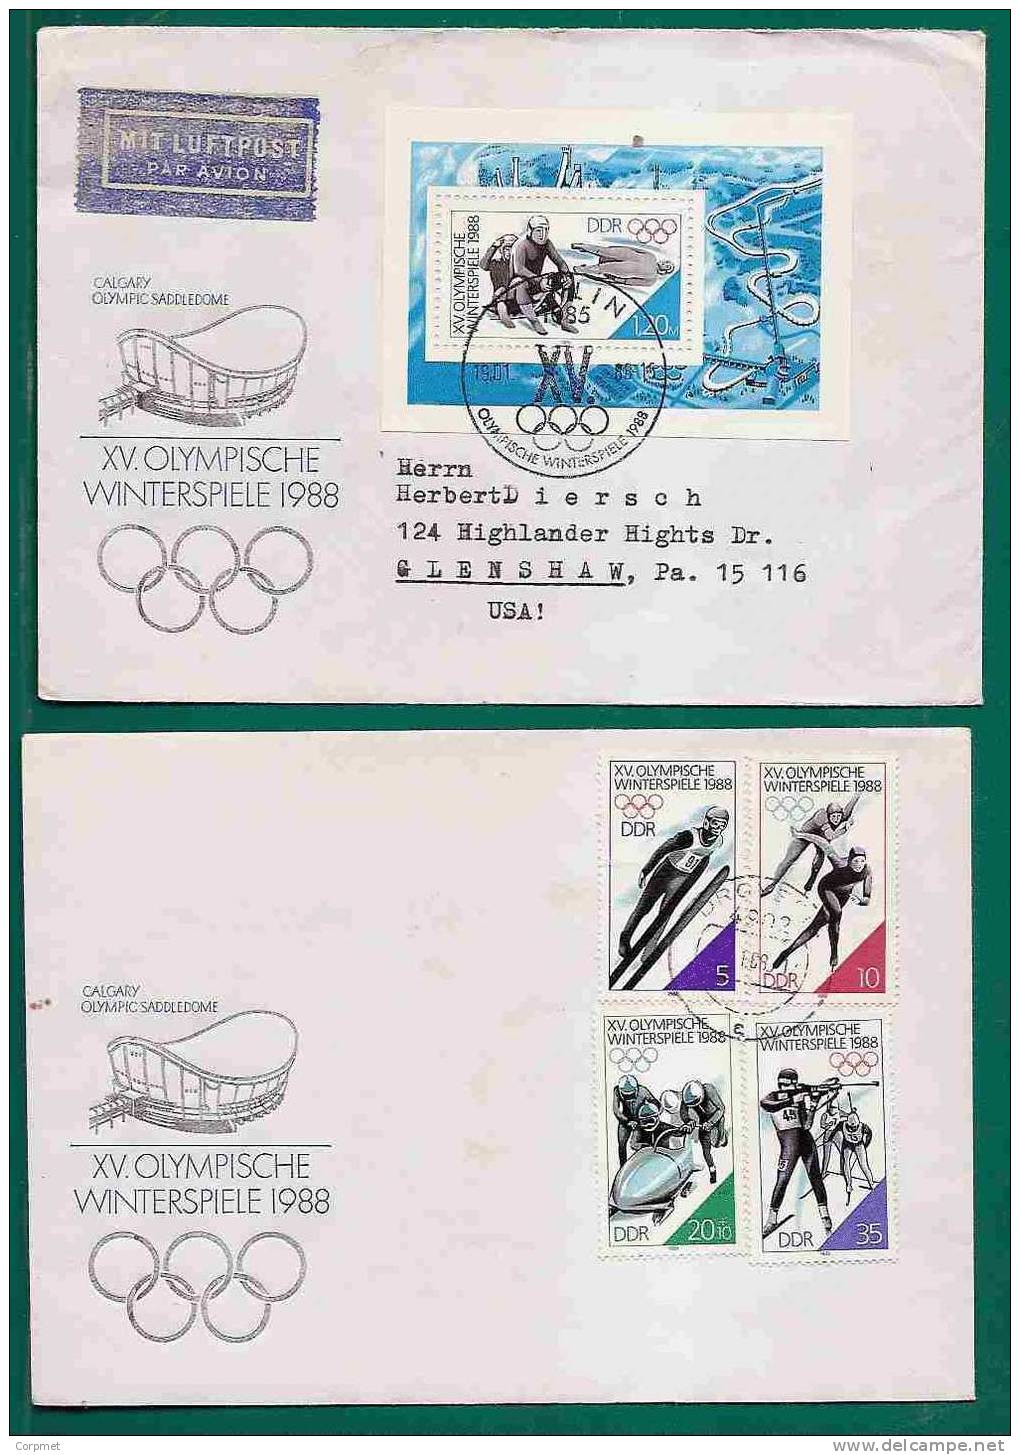 OLYMPIC GAMES - 1988 CALGARY - GERMANY DDR - VF 2 FIRST DAY COVERS - Yvert # 2754/7 And SOUVENIR SHEET # Bl 89 - Winter 1988: Calgary